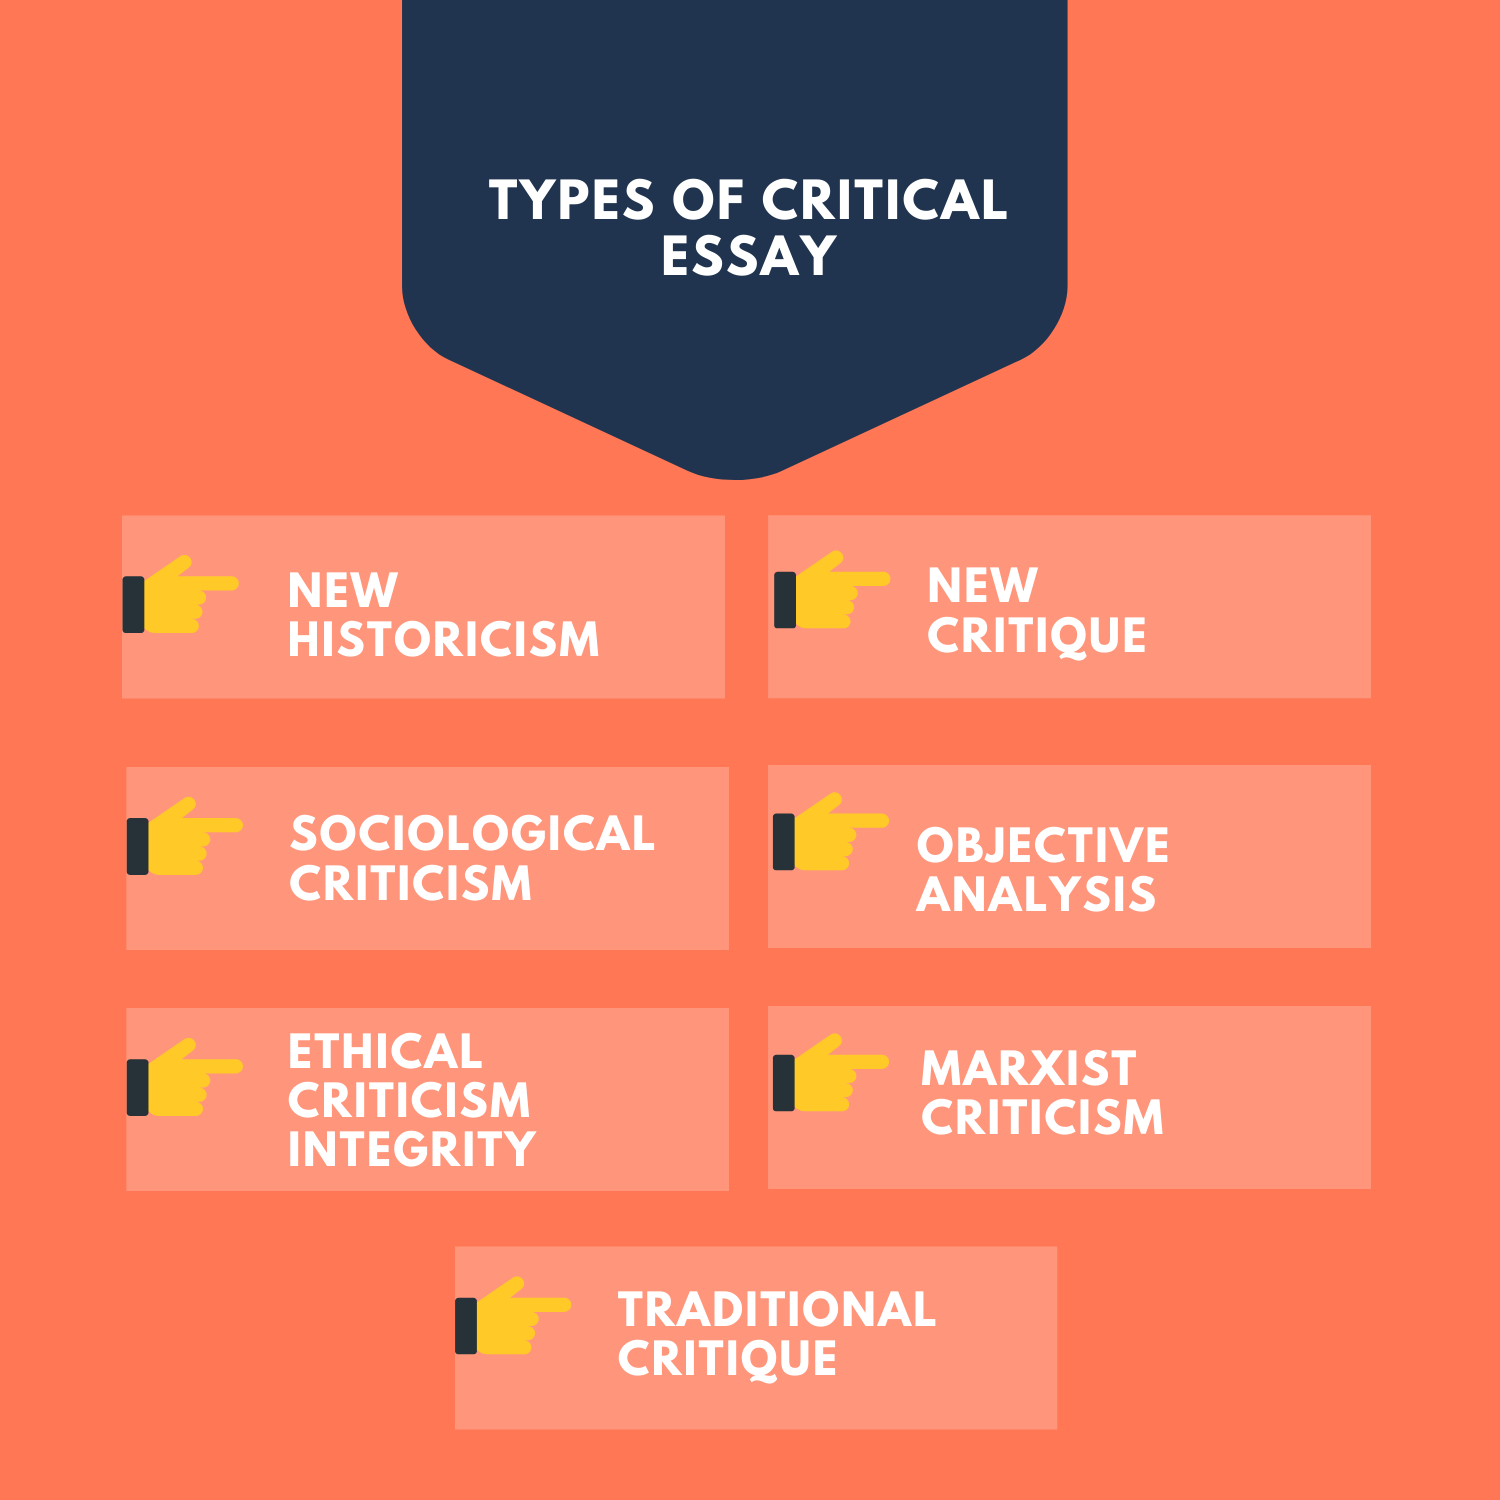 what are the types of critical essay